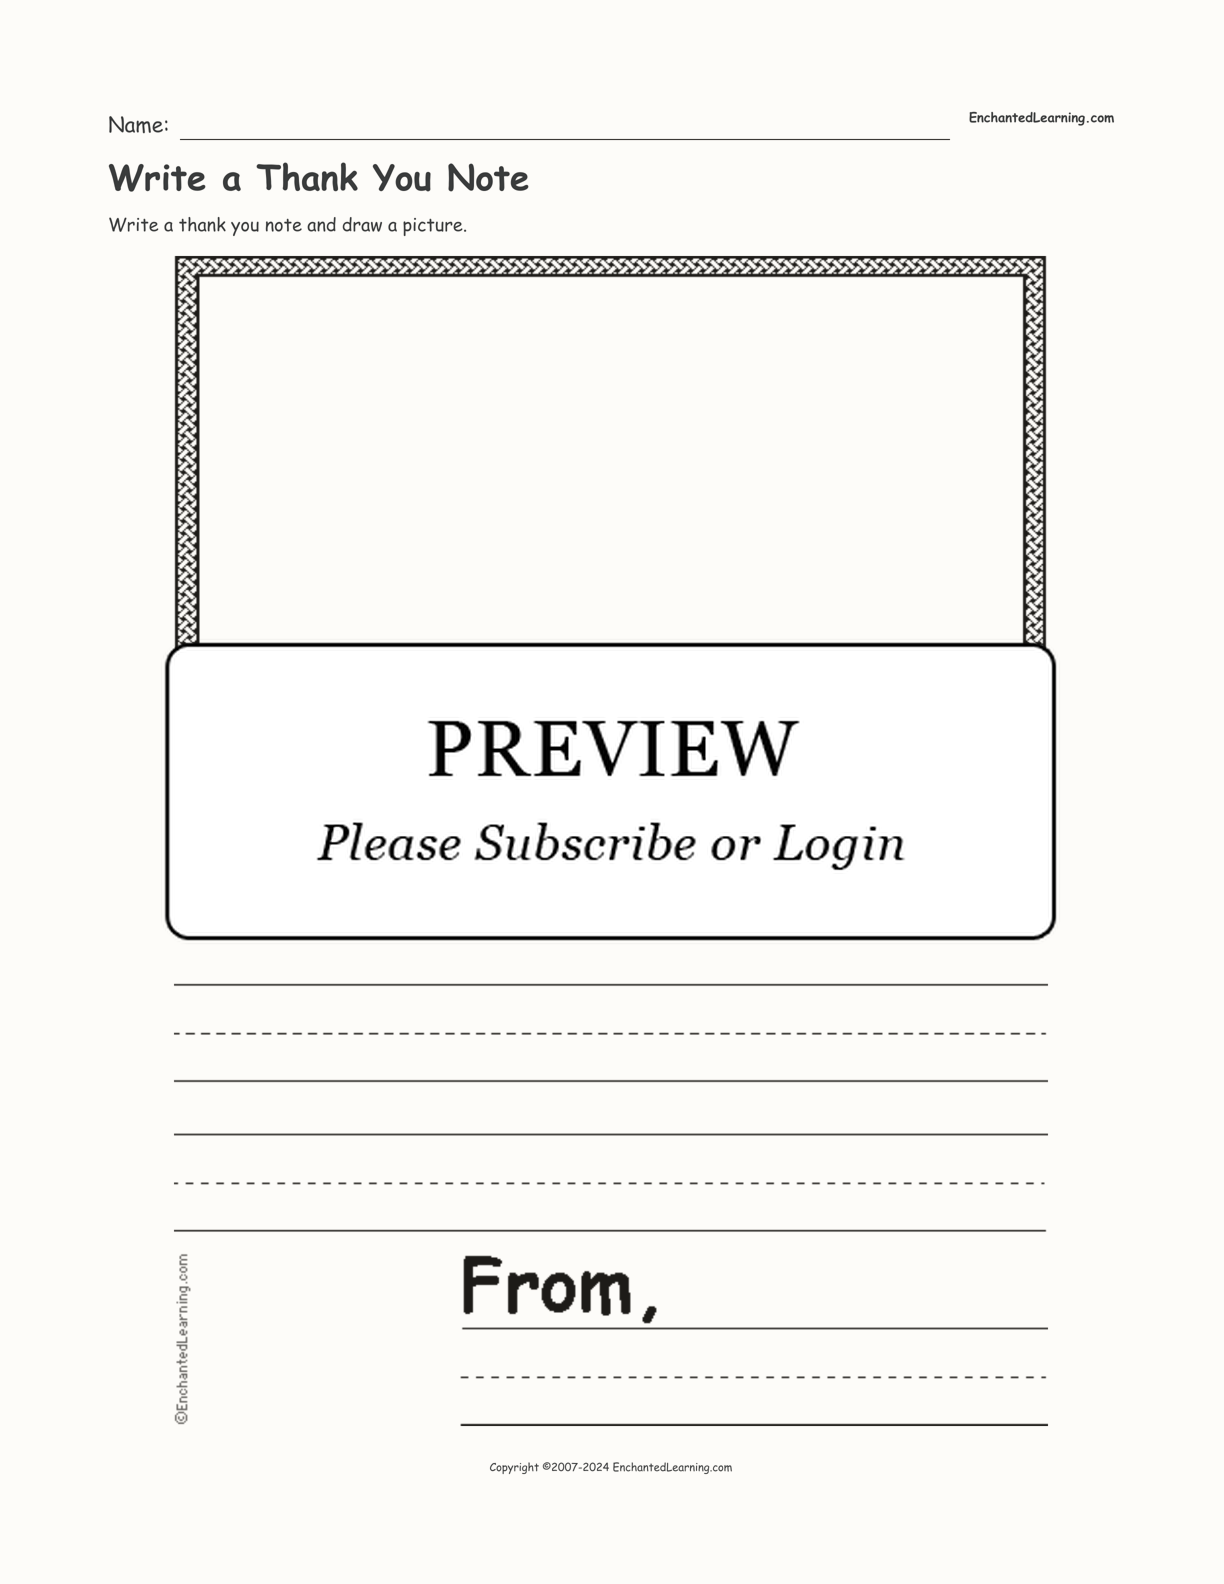 Write a Thank You Note interactive worksheet page 1